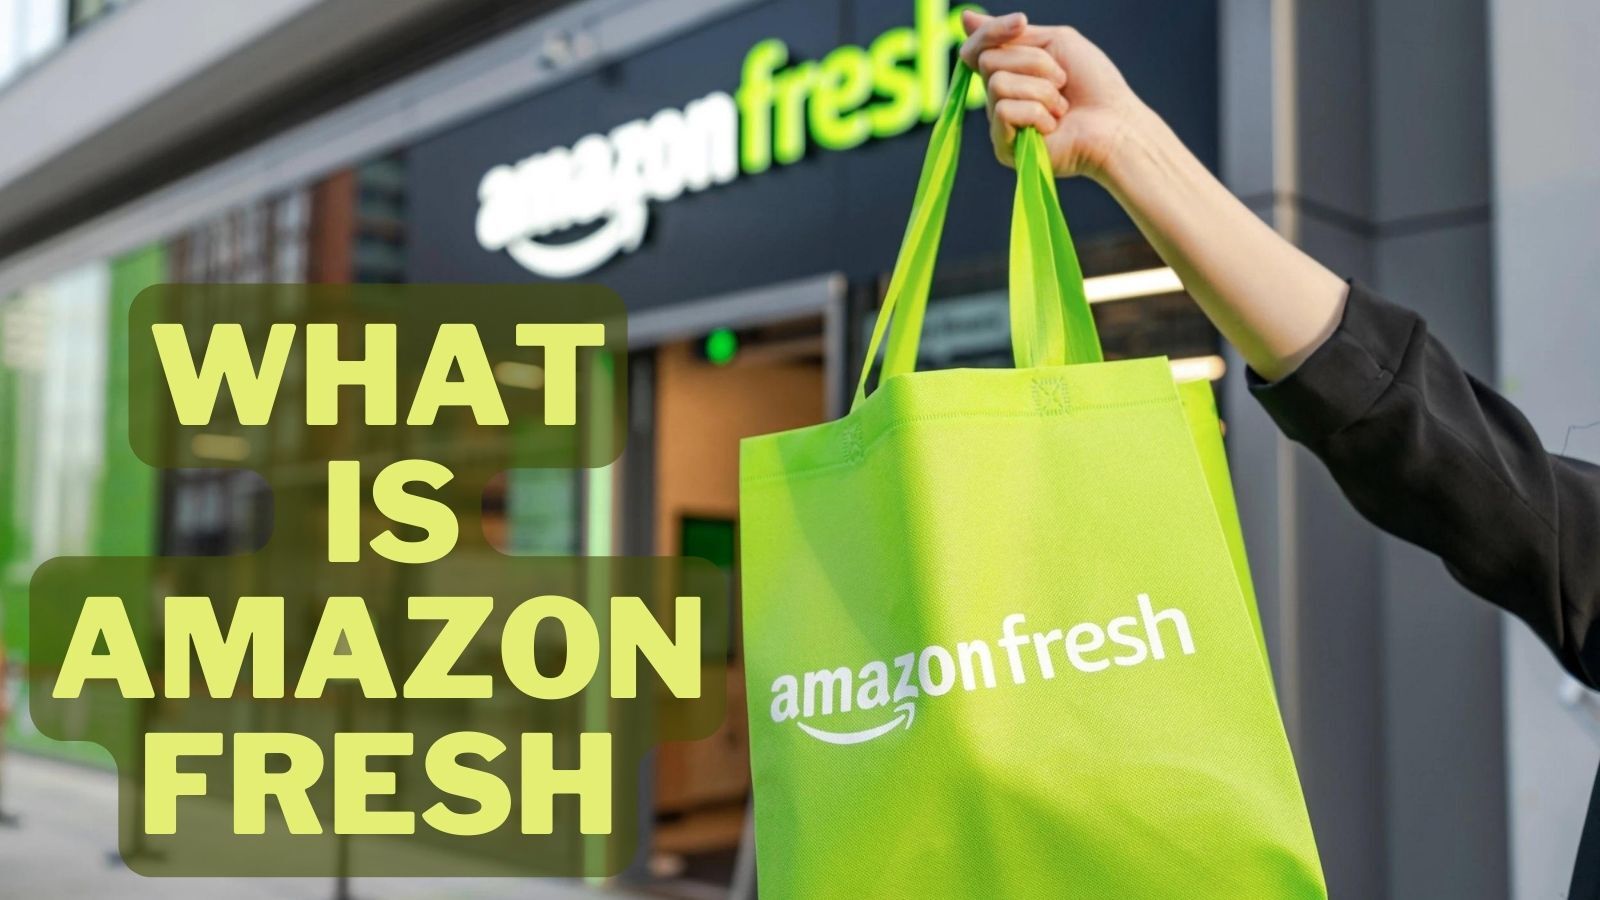 What Is Amazon Fresh? (All You Need to Know)